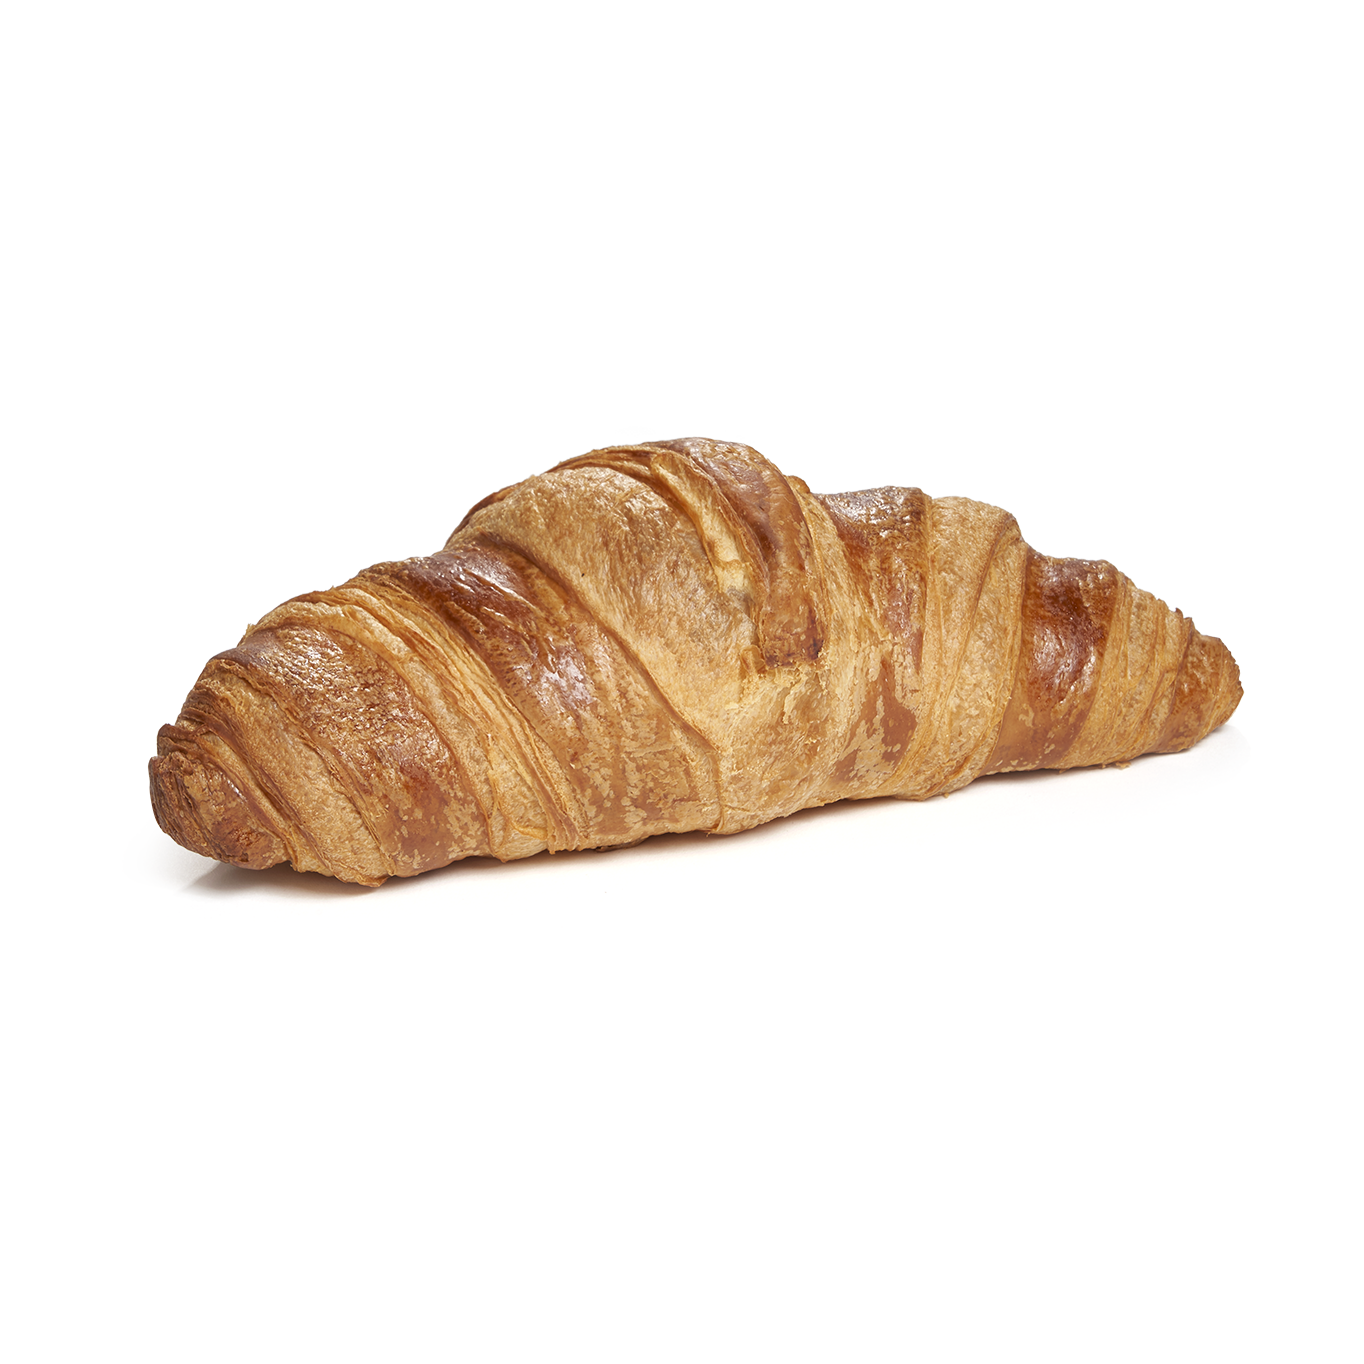 frozen and Croissant - Straight bread Butter pastries Ferm. Pre-baked 90g